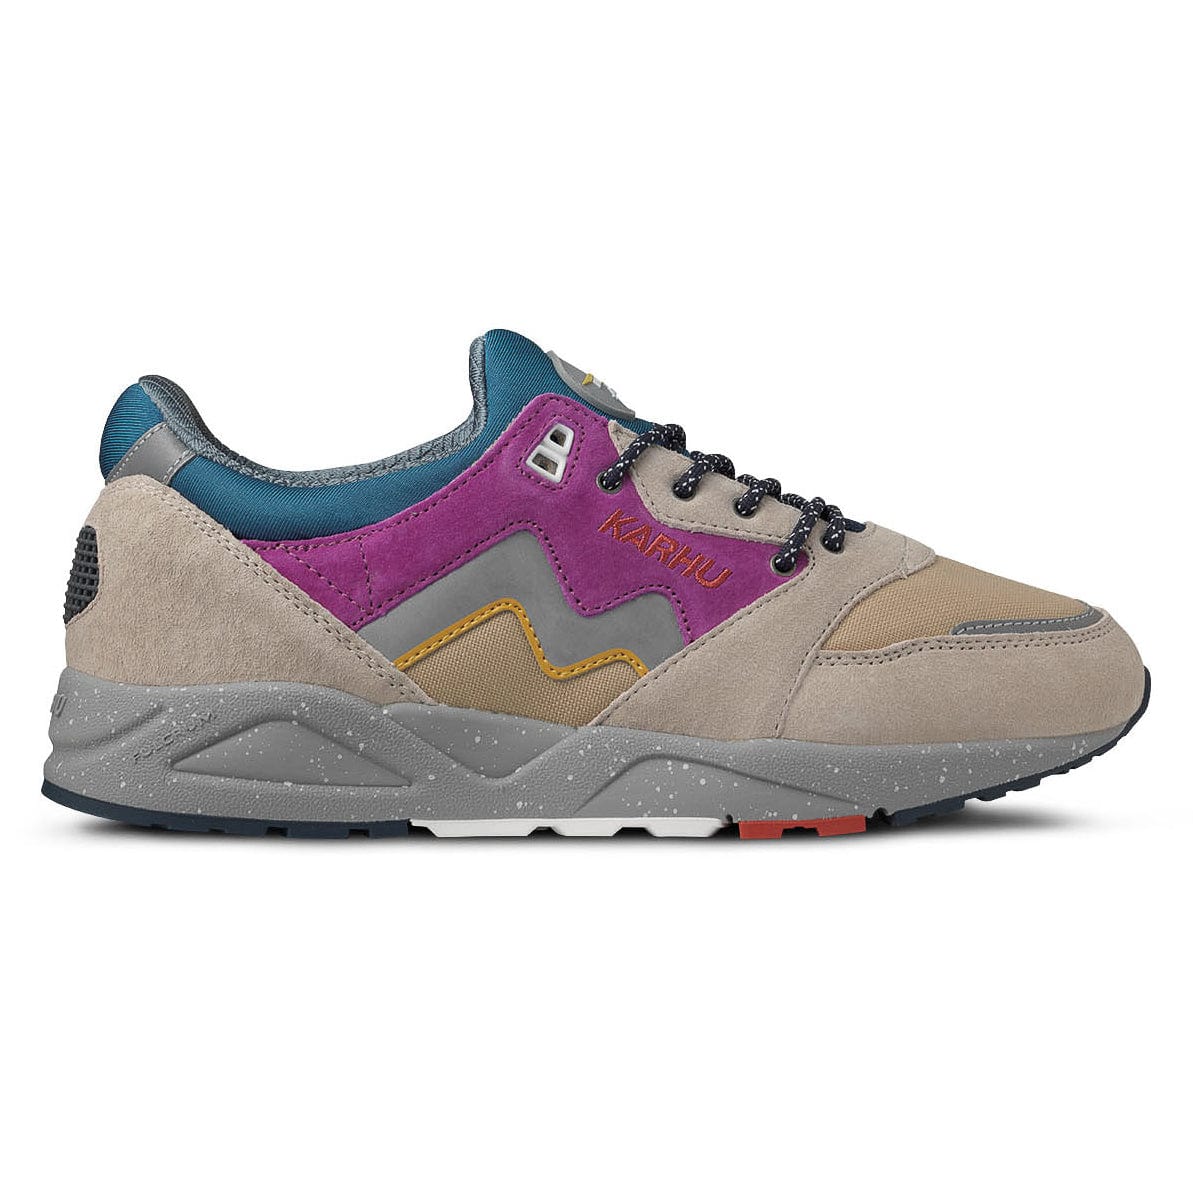 Aria 95 in silver lining and mulberry - Karhu - State Of Flux